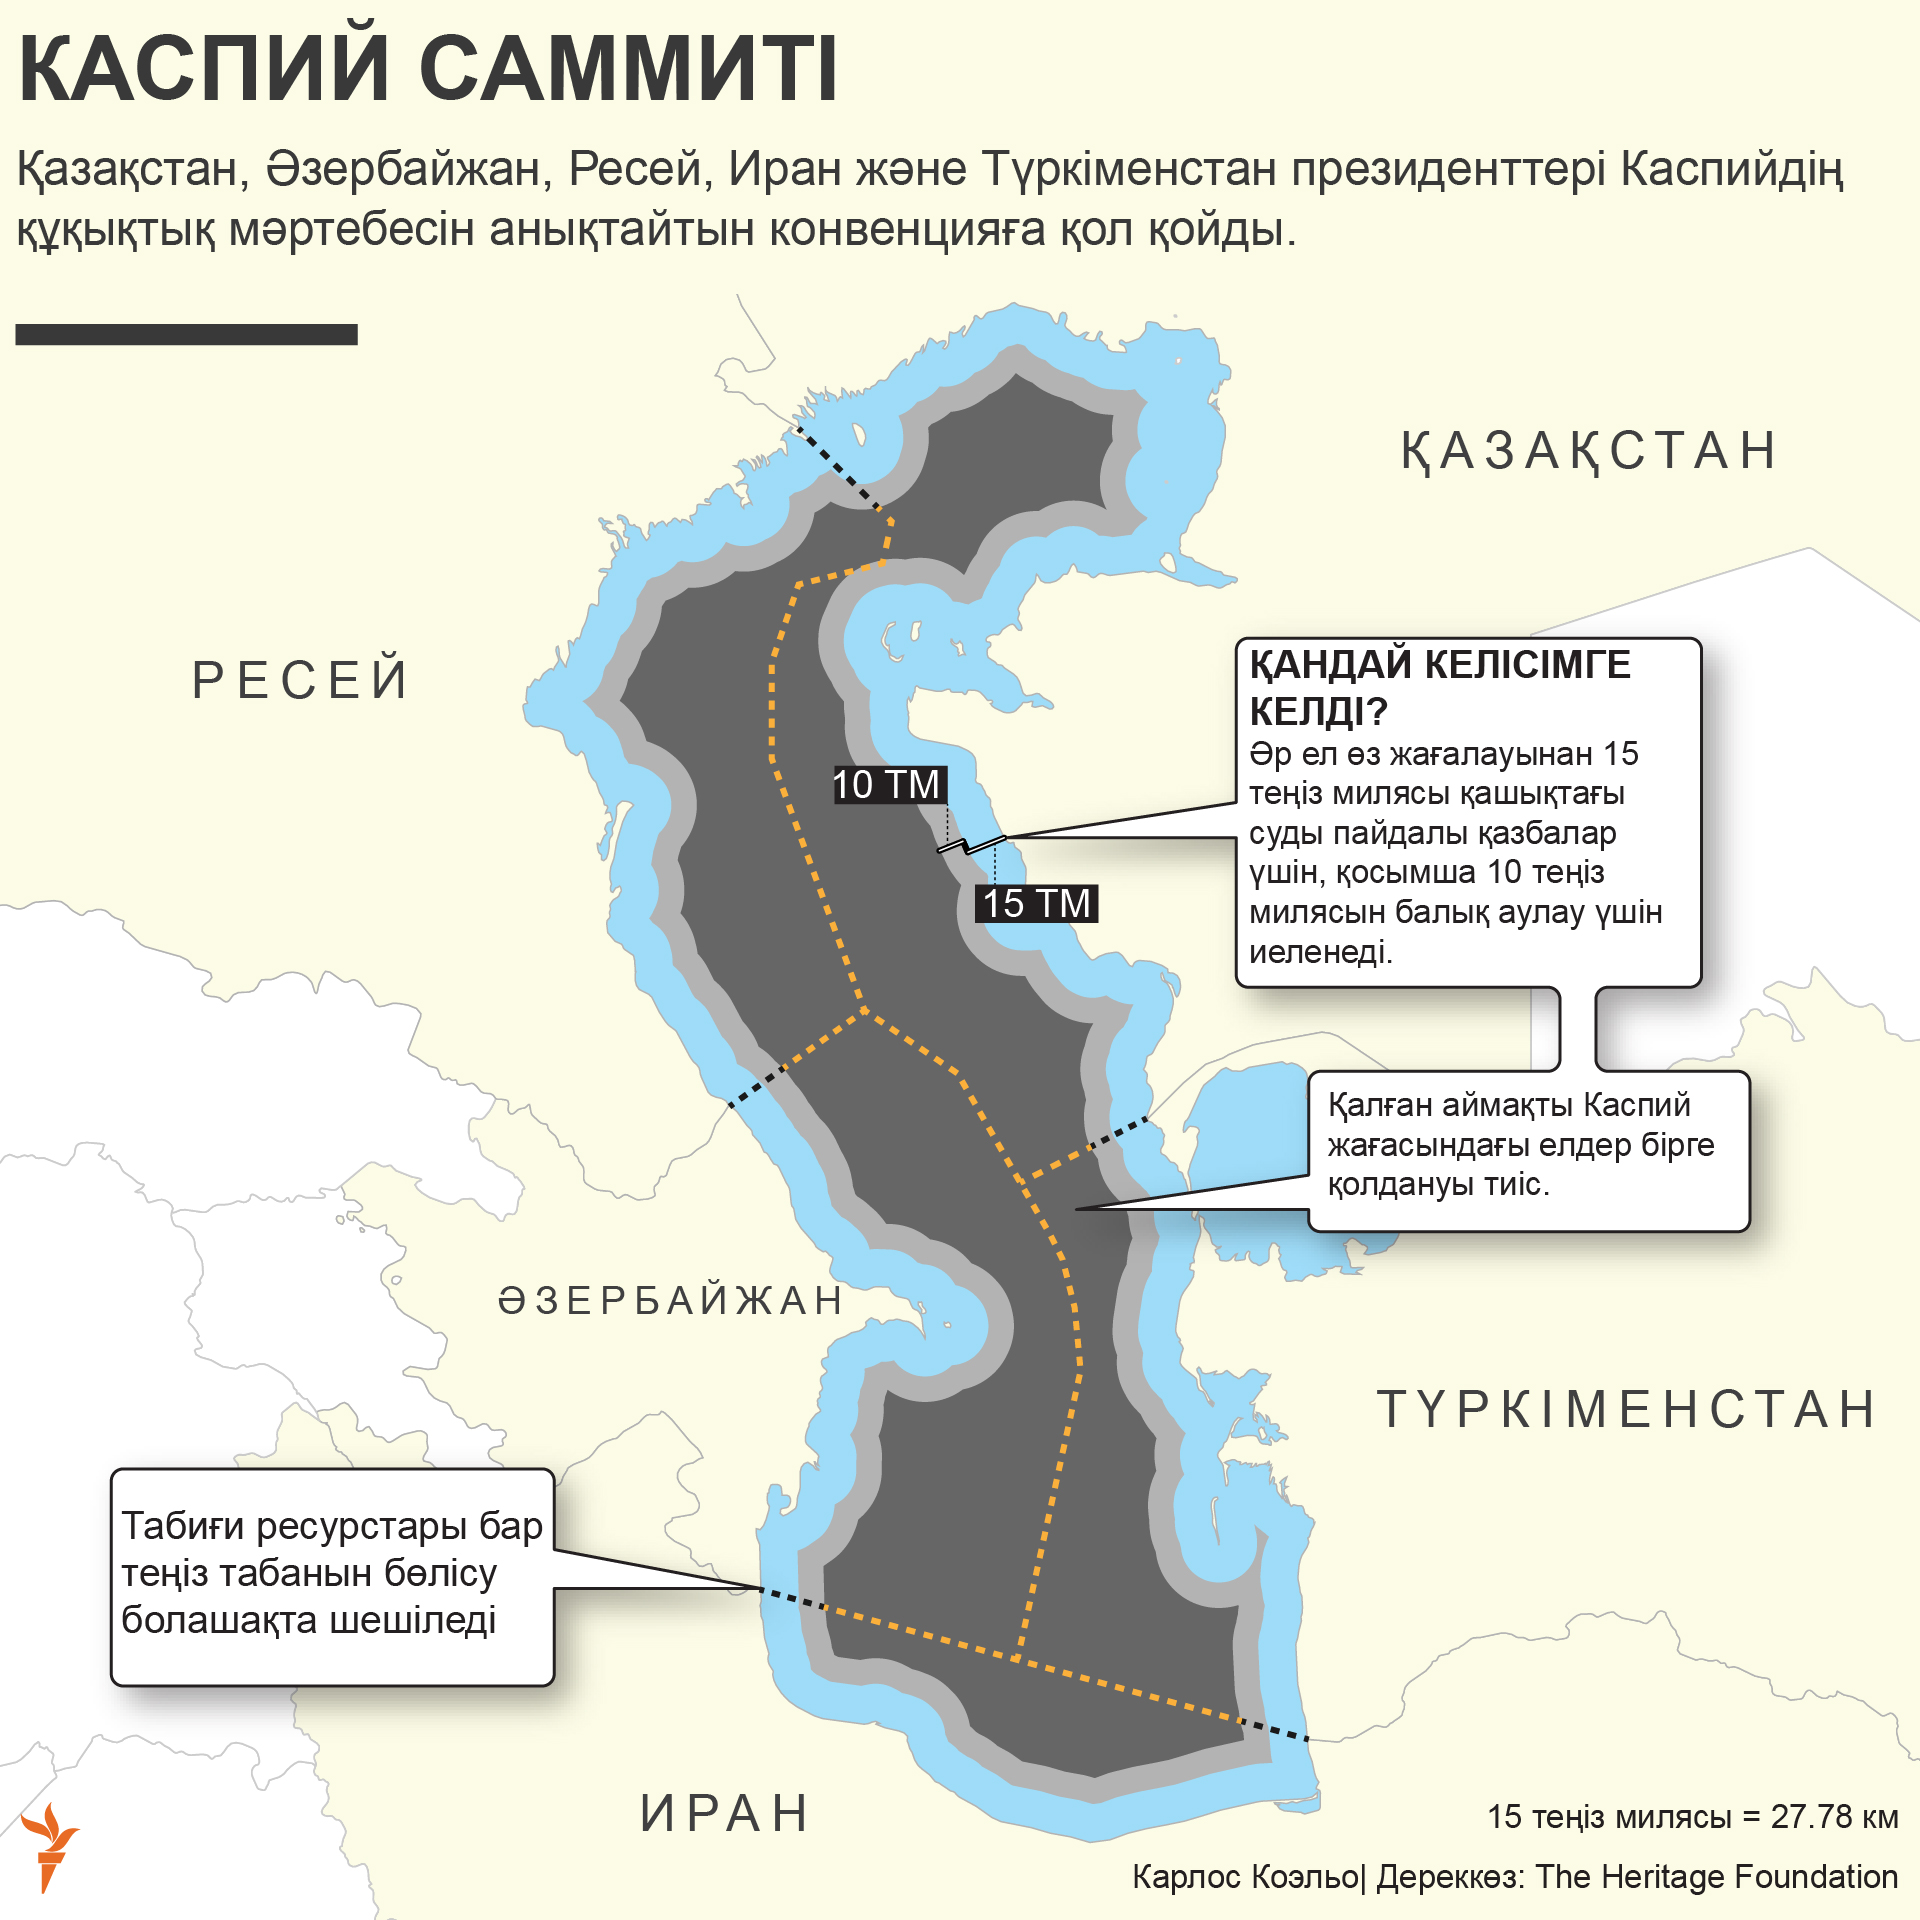 infographic about caspian summit